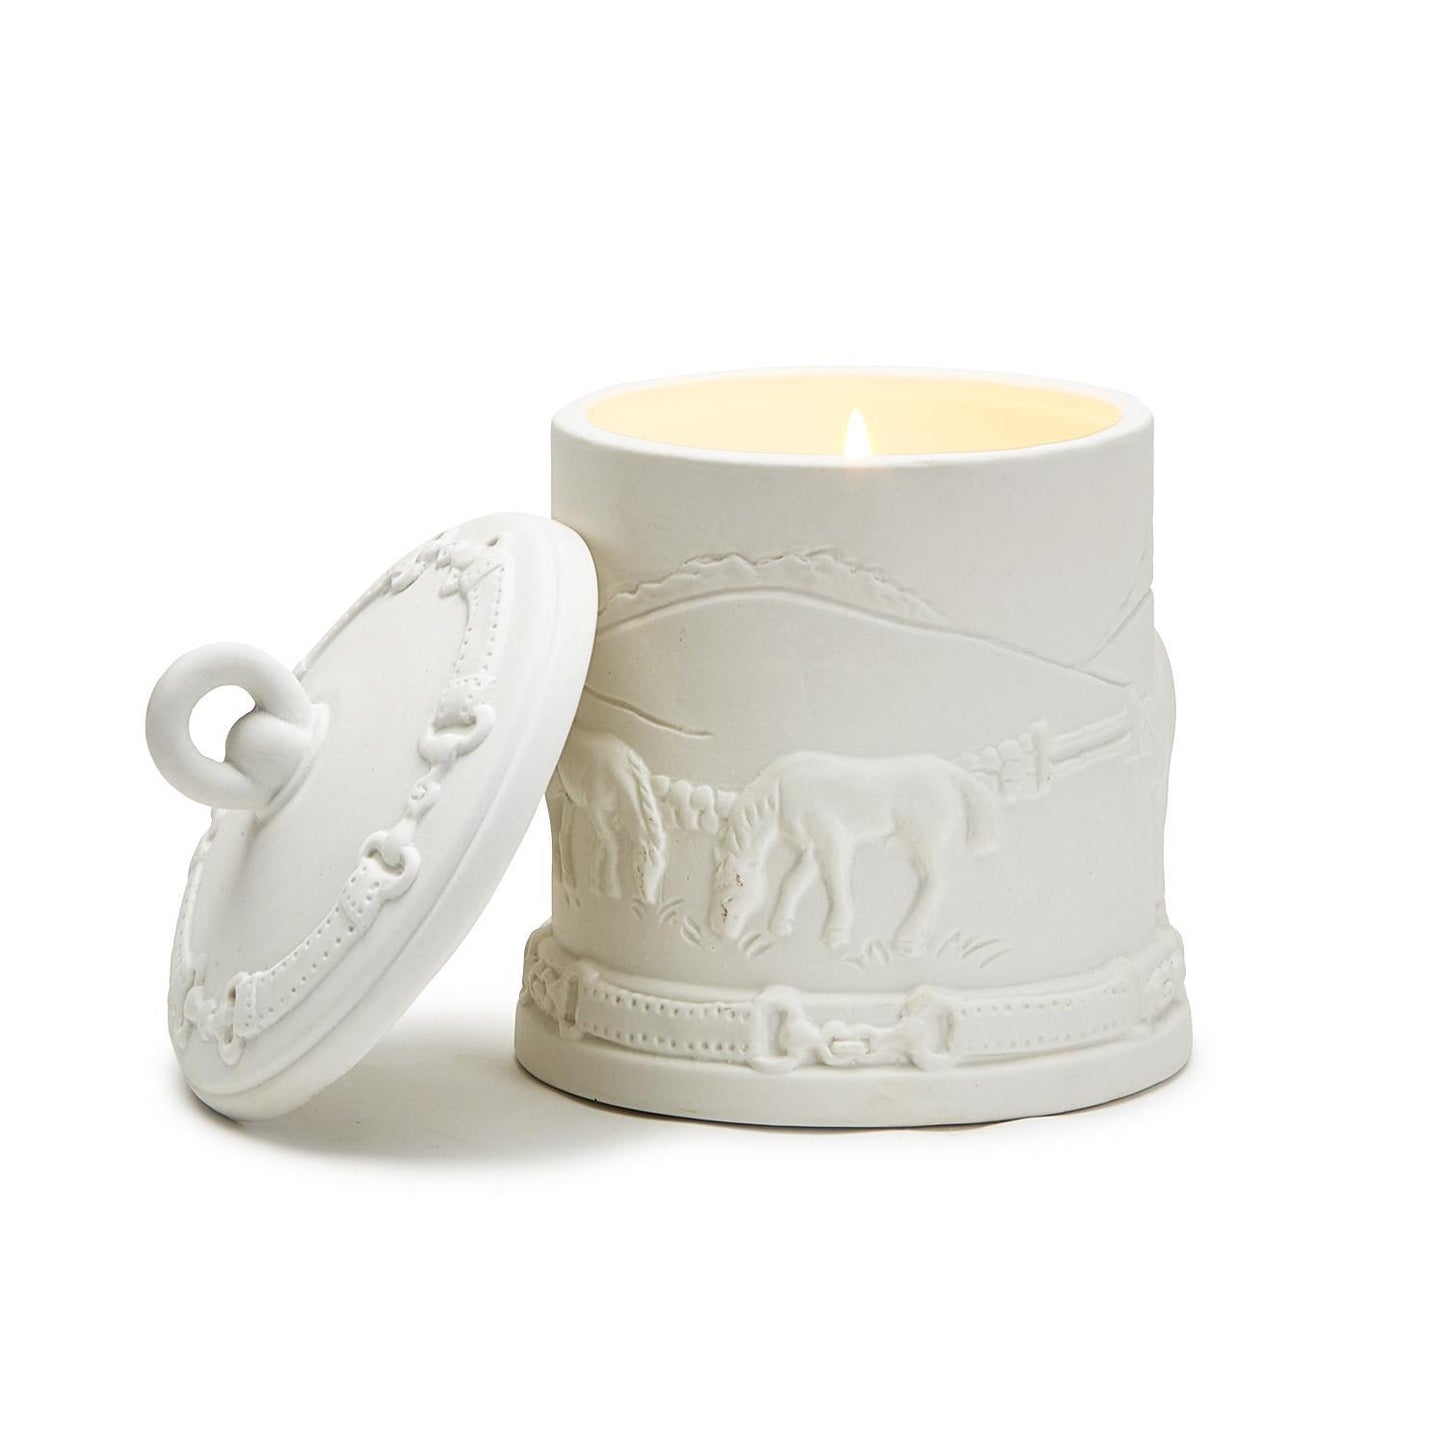 Equus Cedar & Leather Scent Bisque Lidded Candle with Relief Pattern.